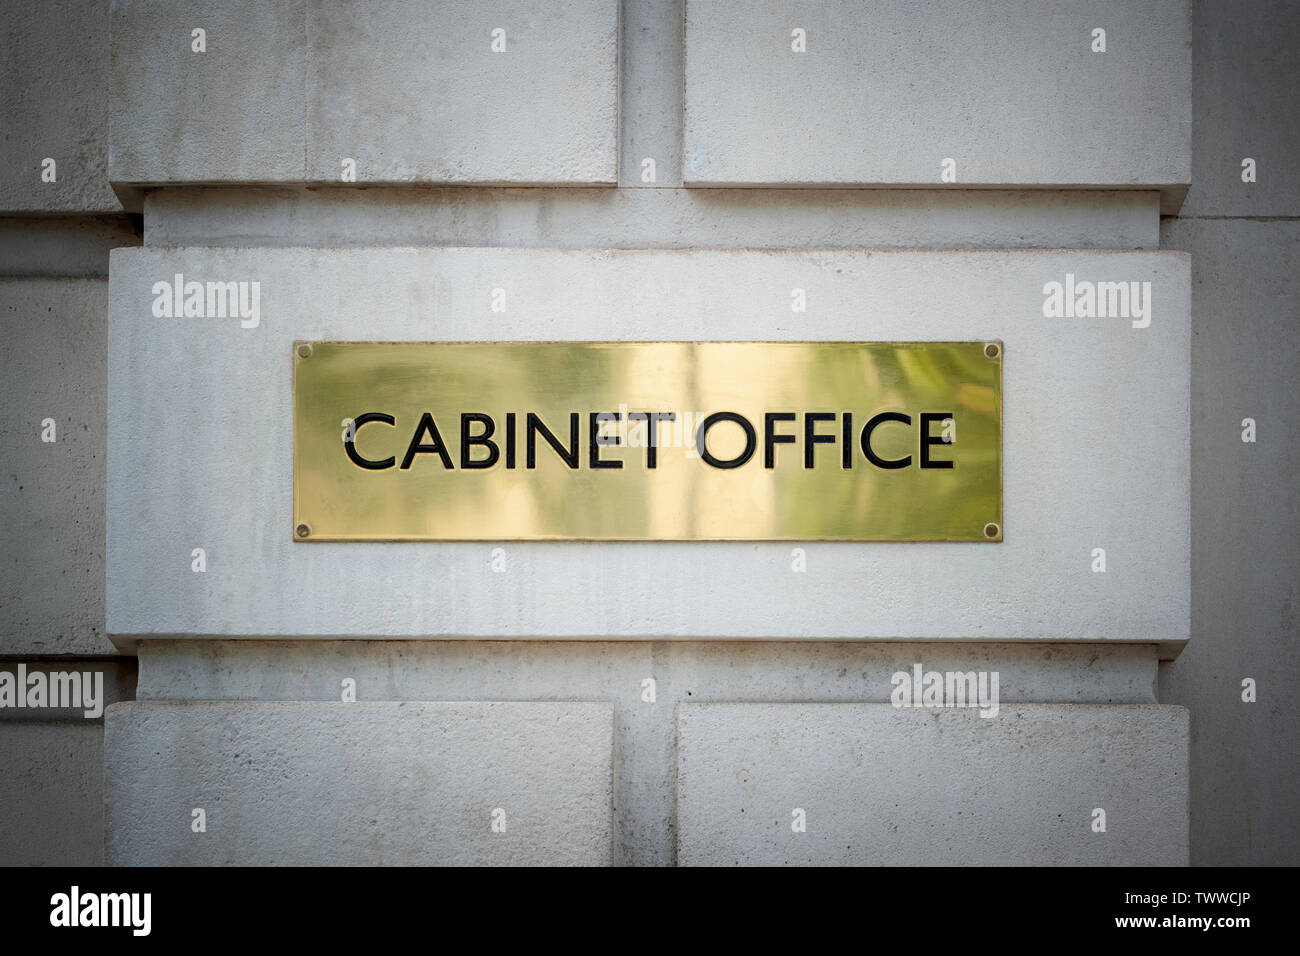 Signage for the Cabinet Office building located on Whitehall in London, UK. Stock Photo